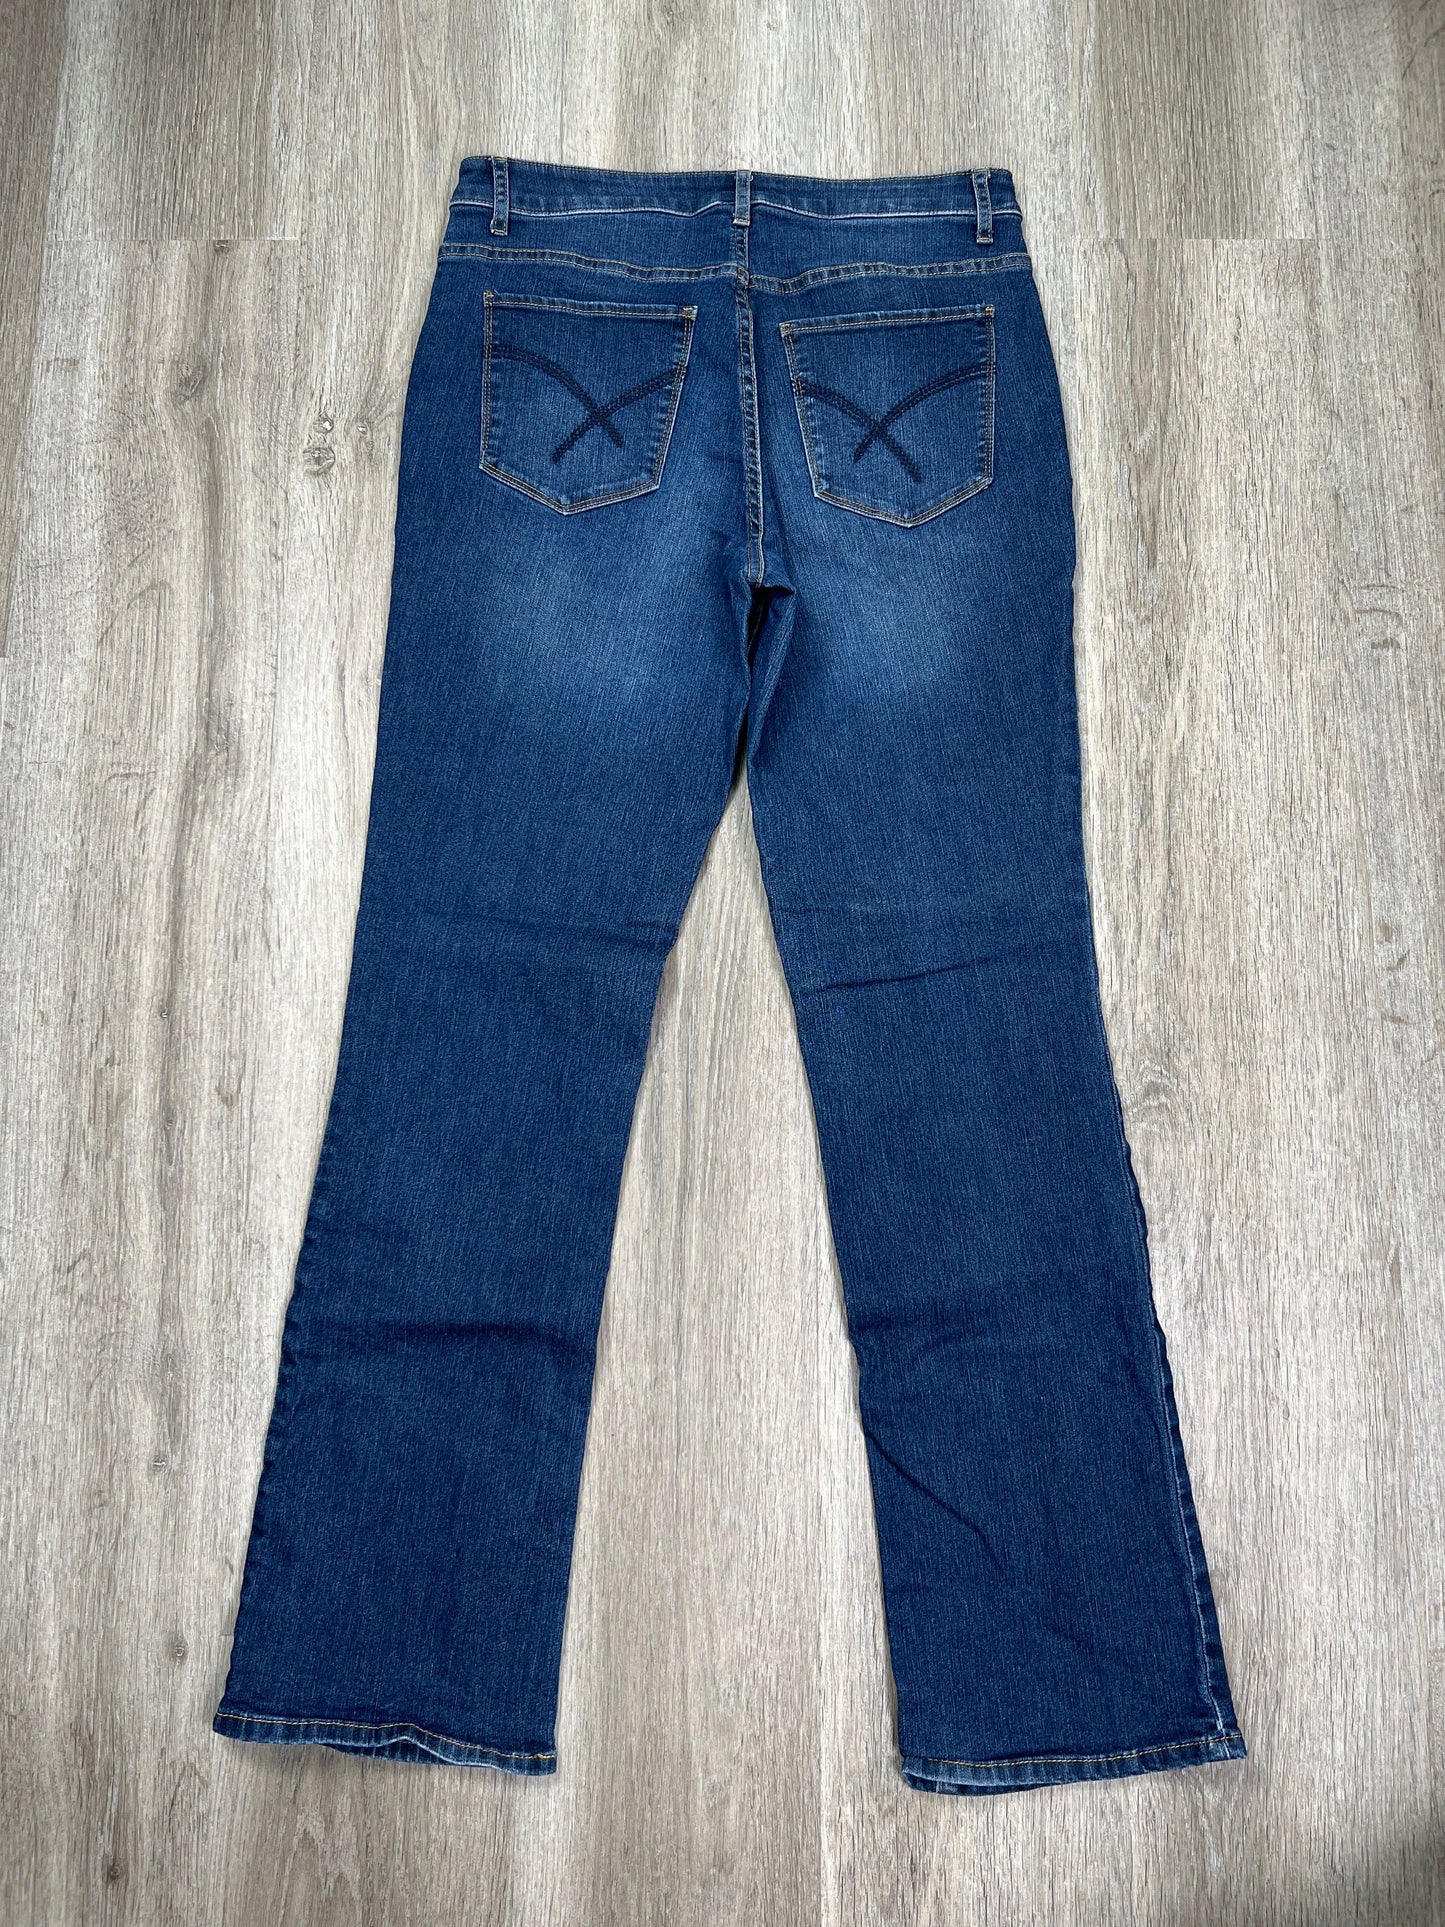 Blue Denim Jeans Straight Christopher And Banks, Size 6